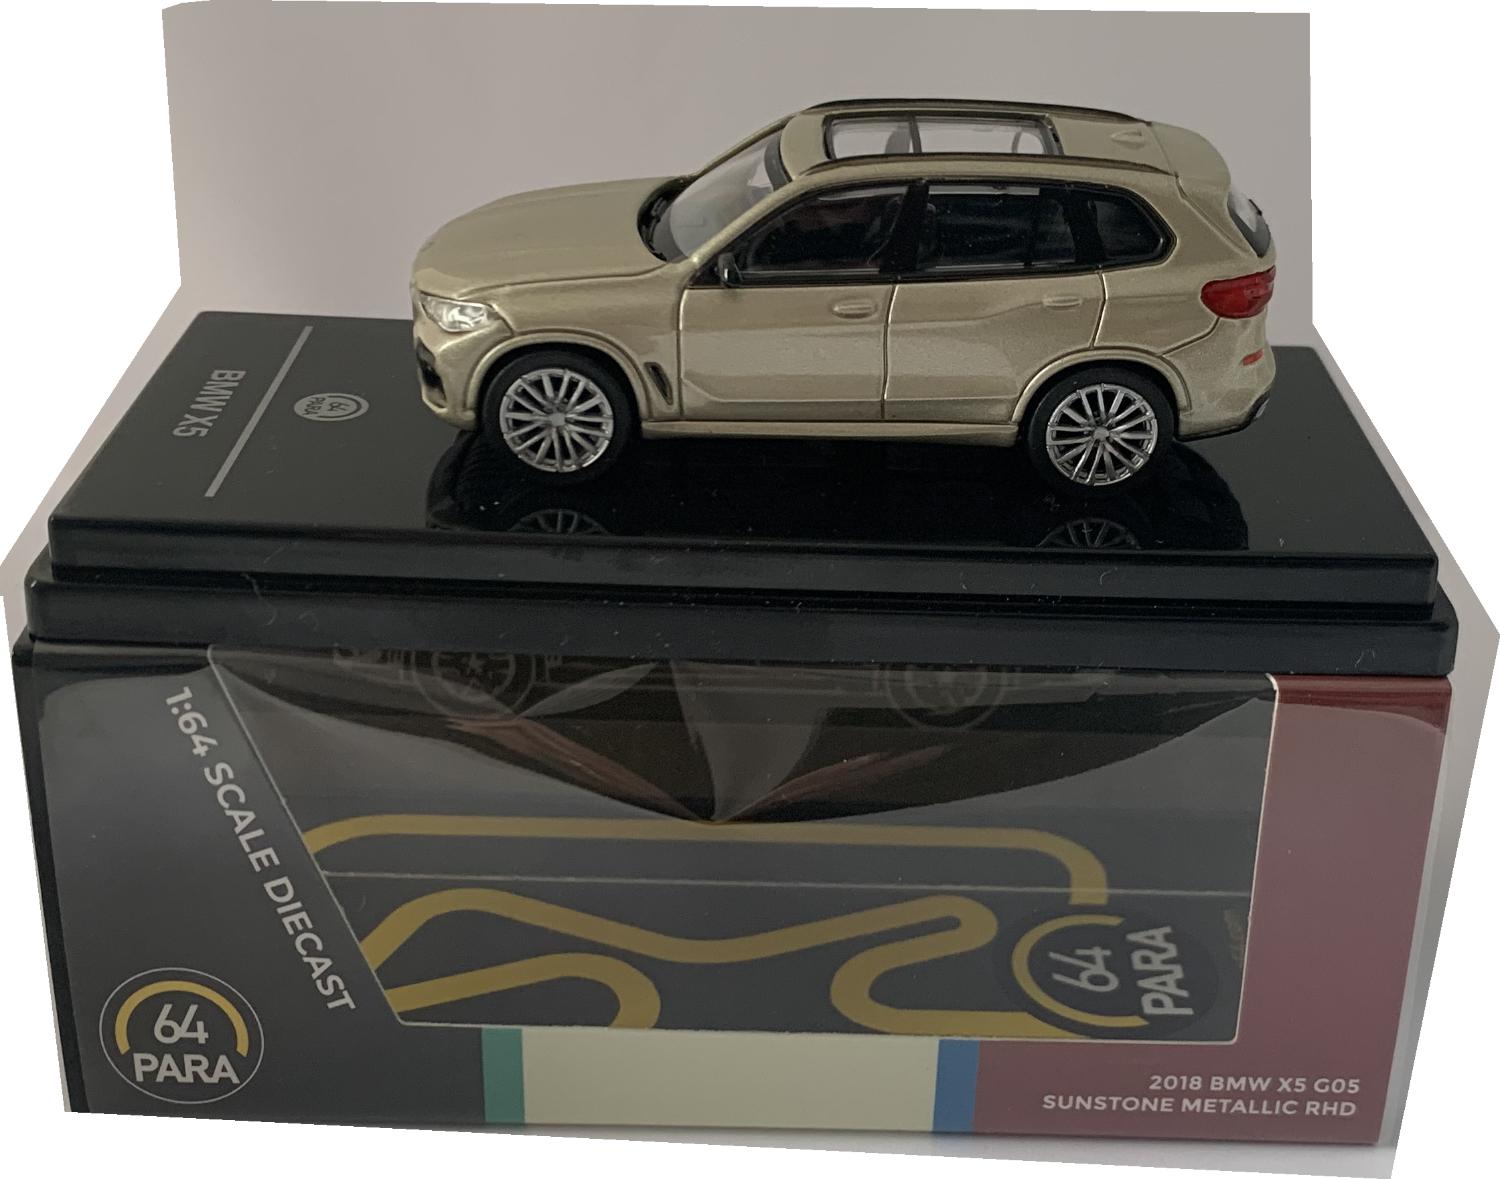 good reproduction of the BMW X5 mounted on a removable plinth and a removable hard plastic cover